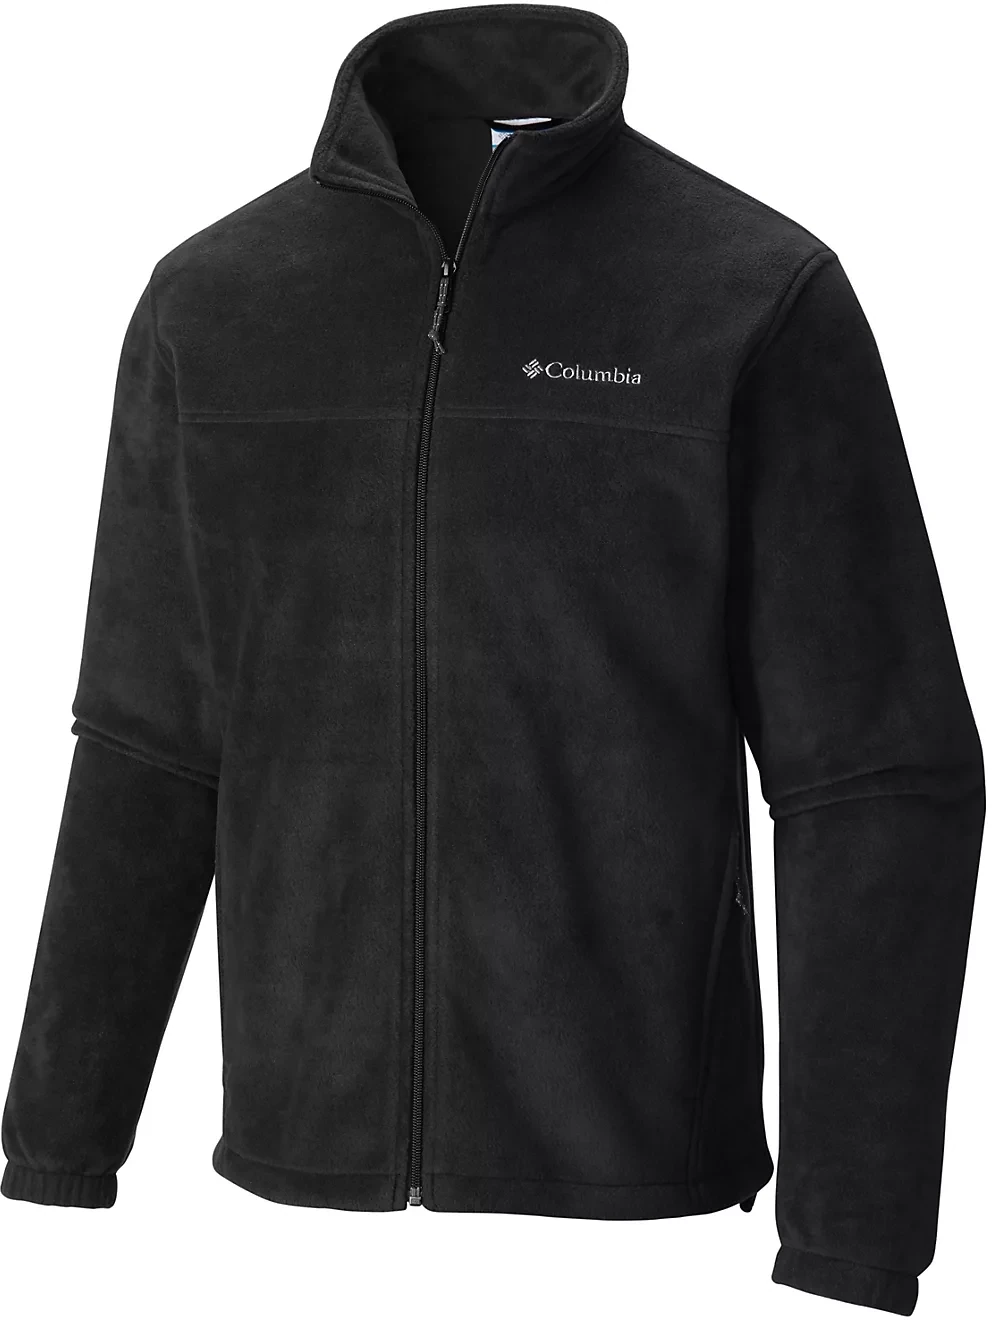 Unlock Wilderness' choice in the Columbia Vs North Face comparison, the Steens Mountain™ 2.0 Full Zip Fleece Jacket by Columbia